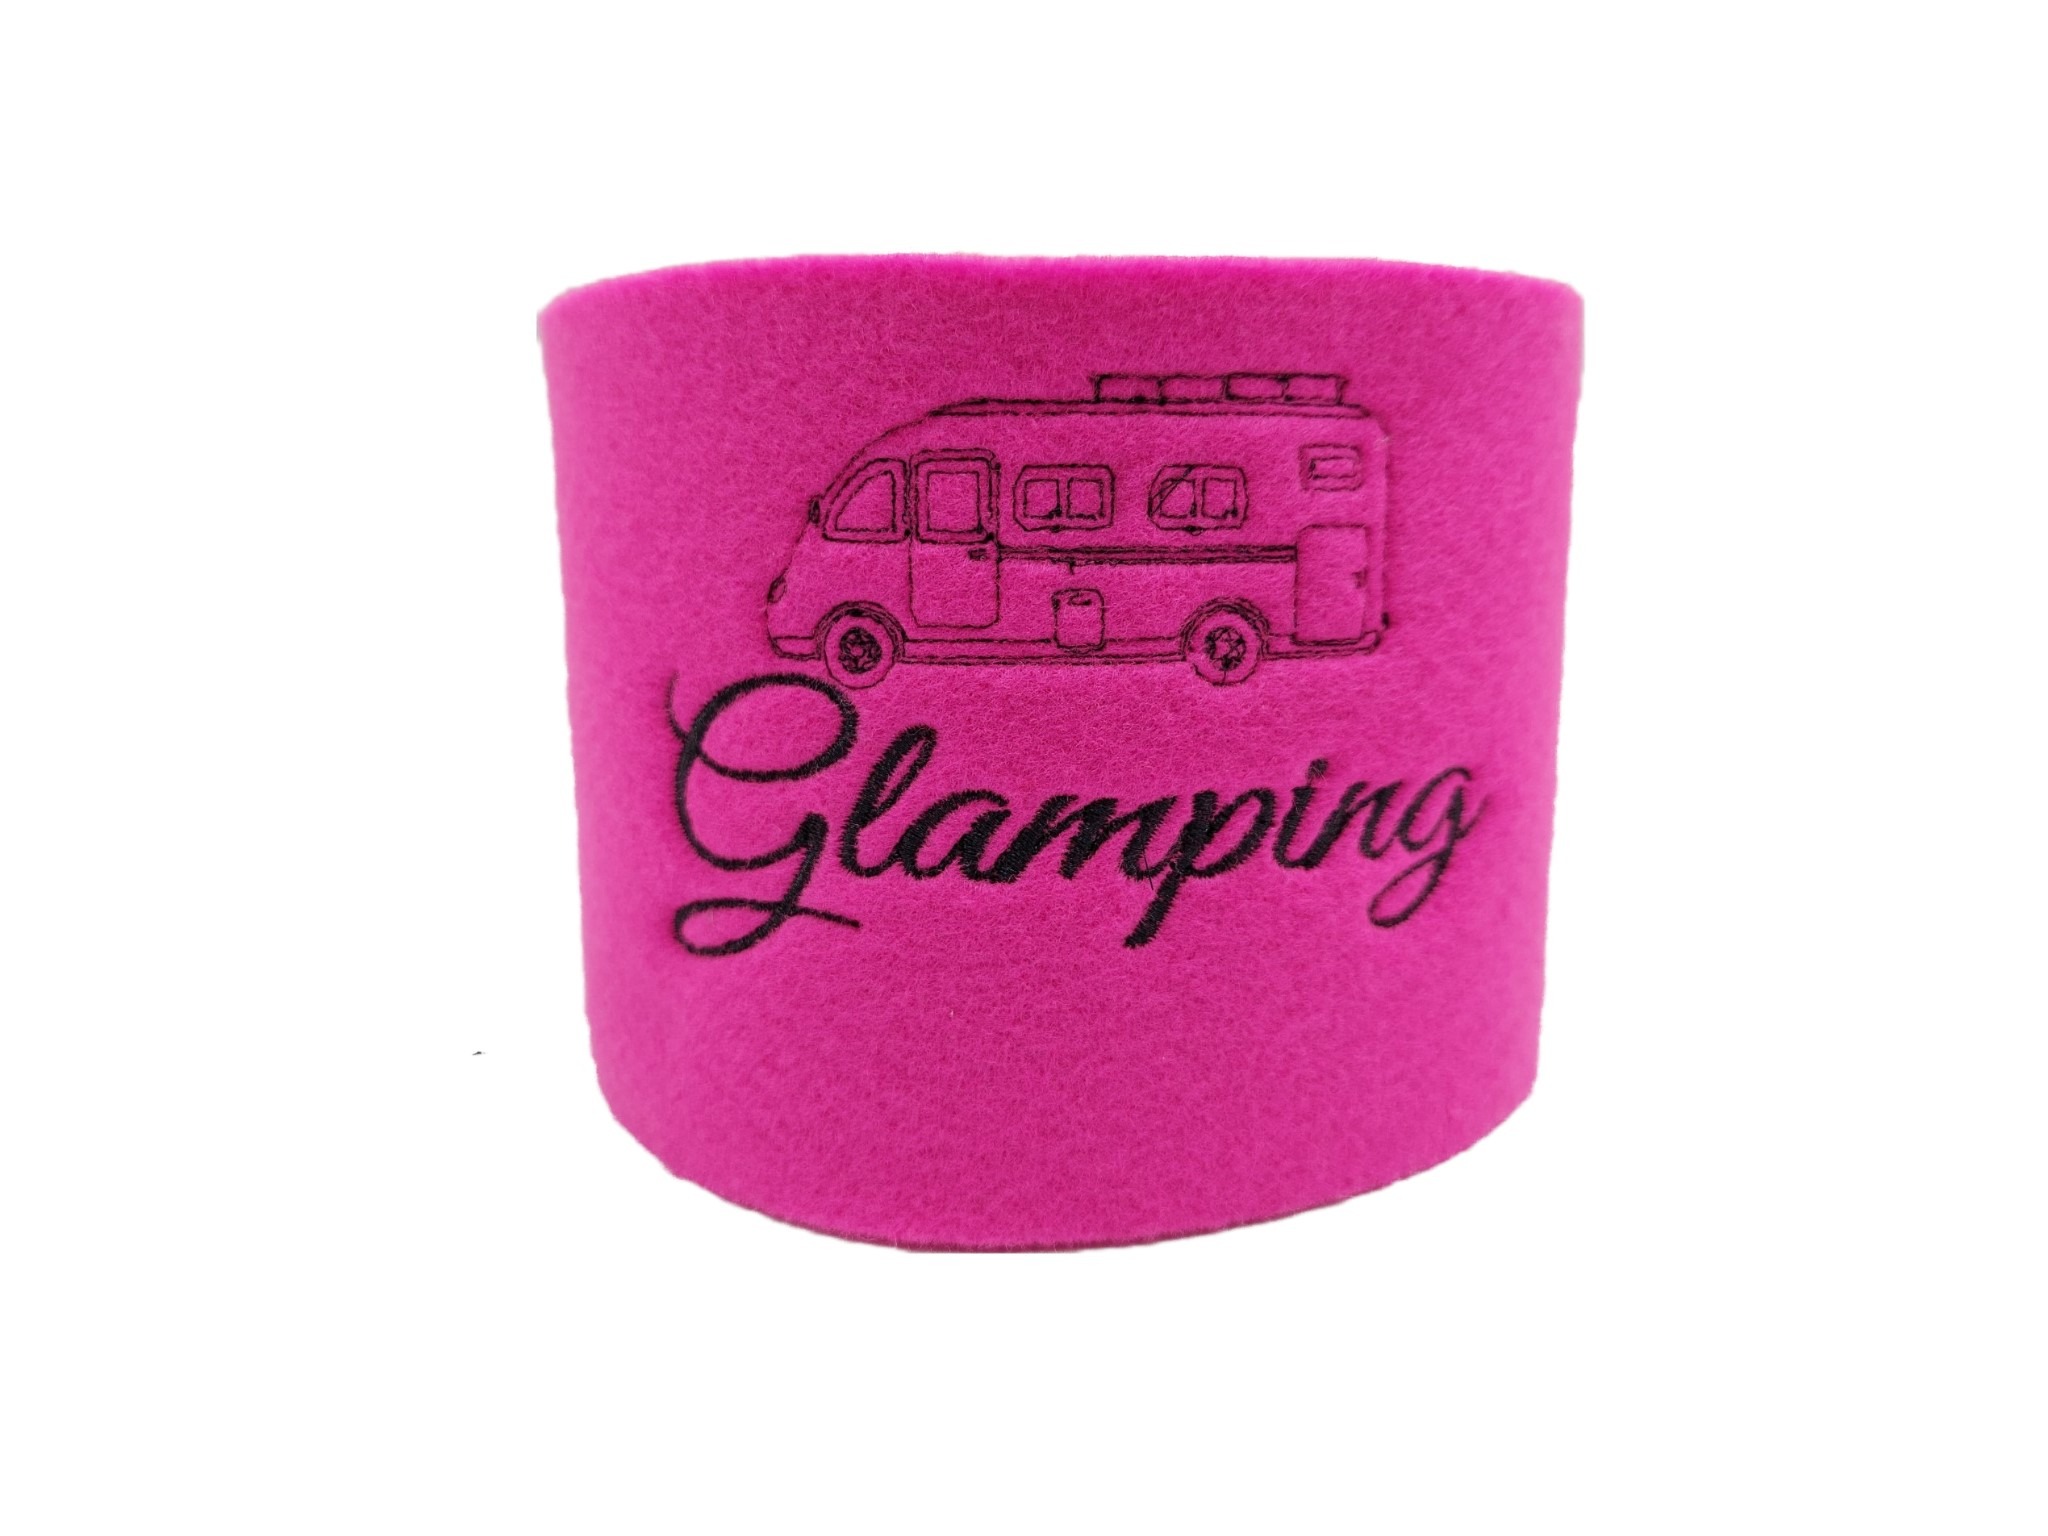 WC Glamping ohne_InPixio